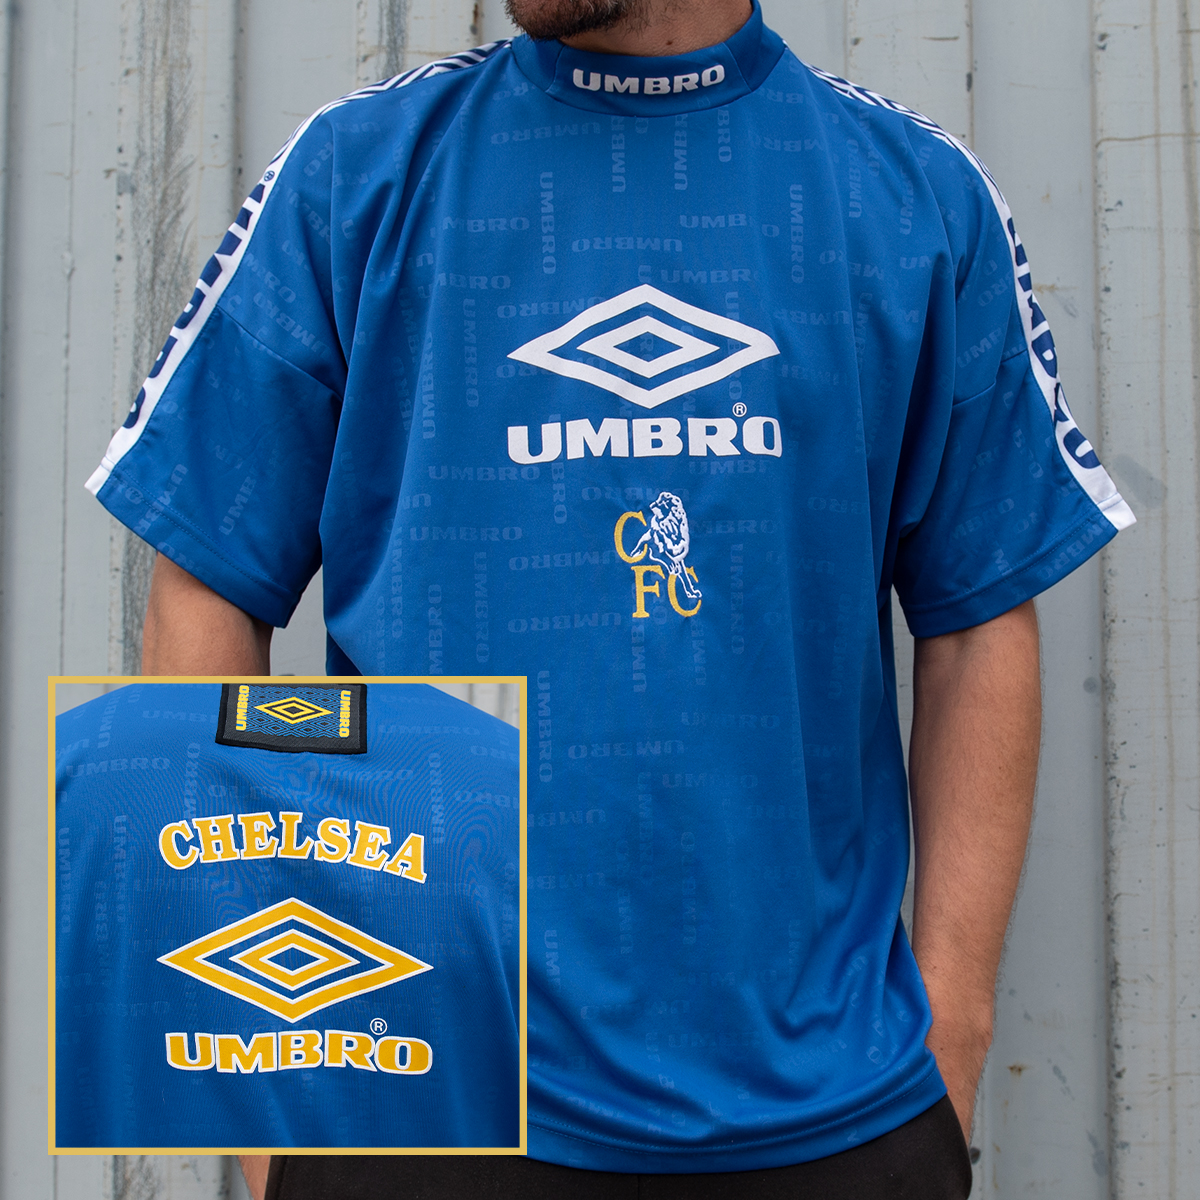 Classic Football Shirts on Twitter: "Chelsea 1998 Top by Umbro 🔵 A training top that would have been worn at Harlington by the likes of Di Matteo, Desailly